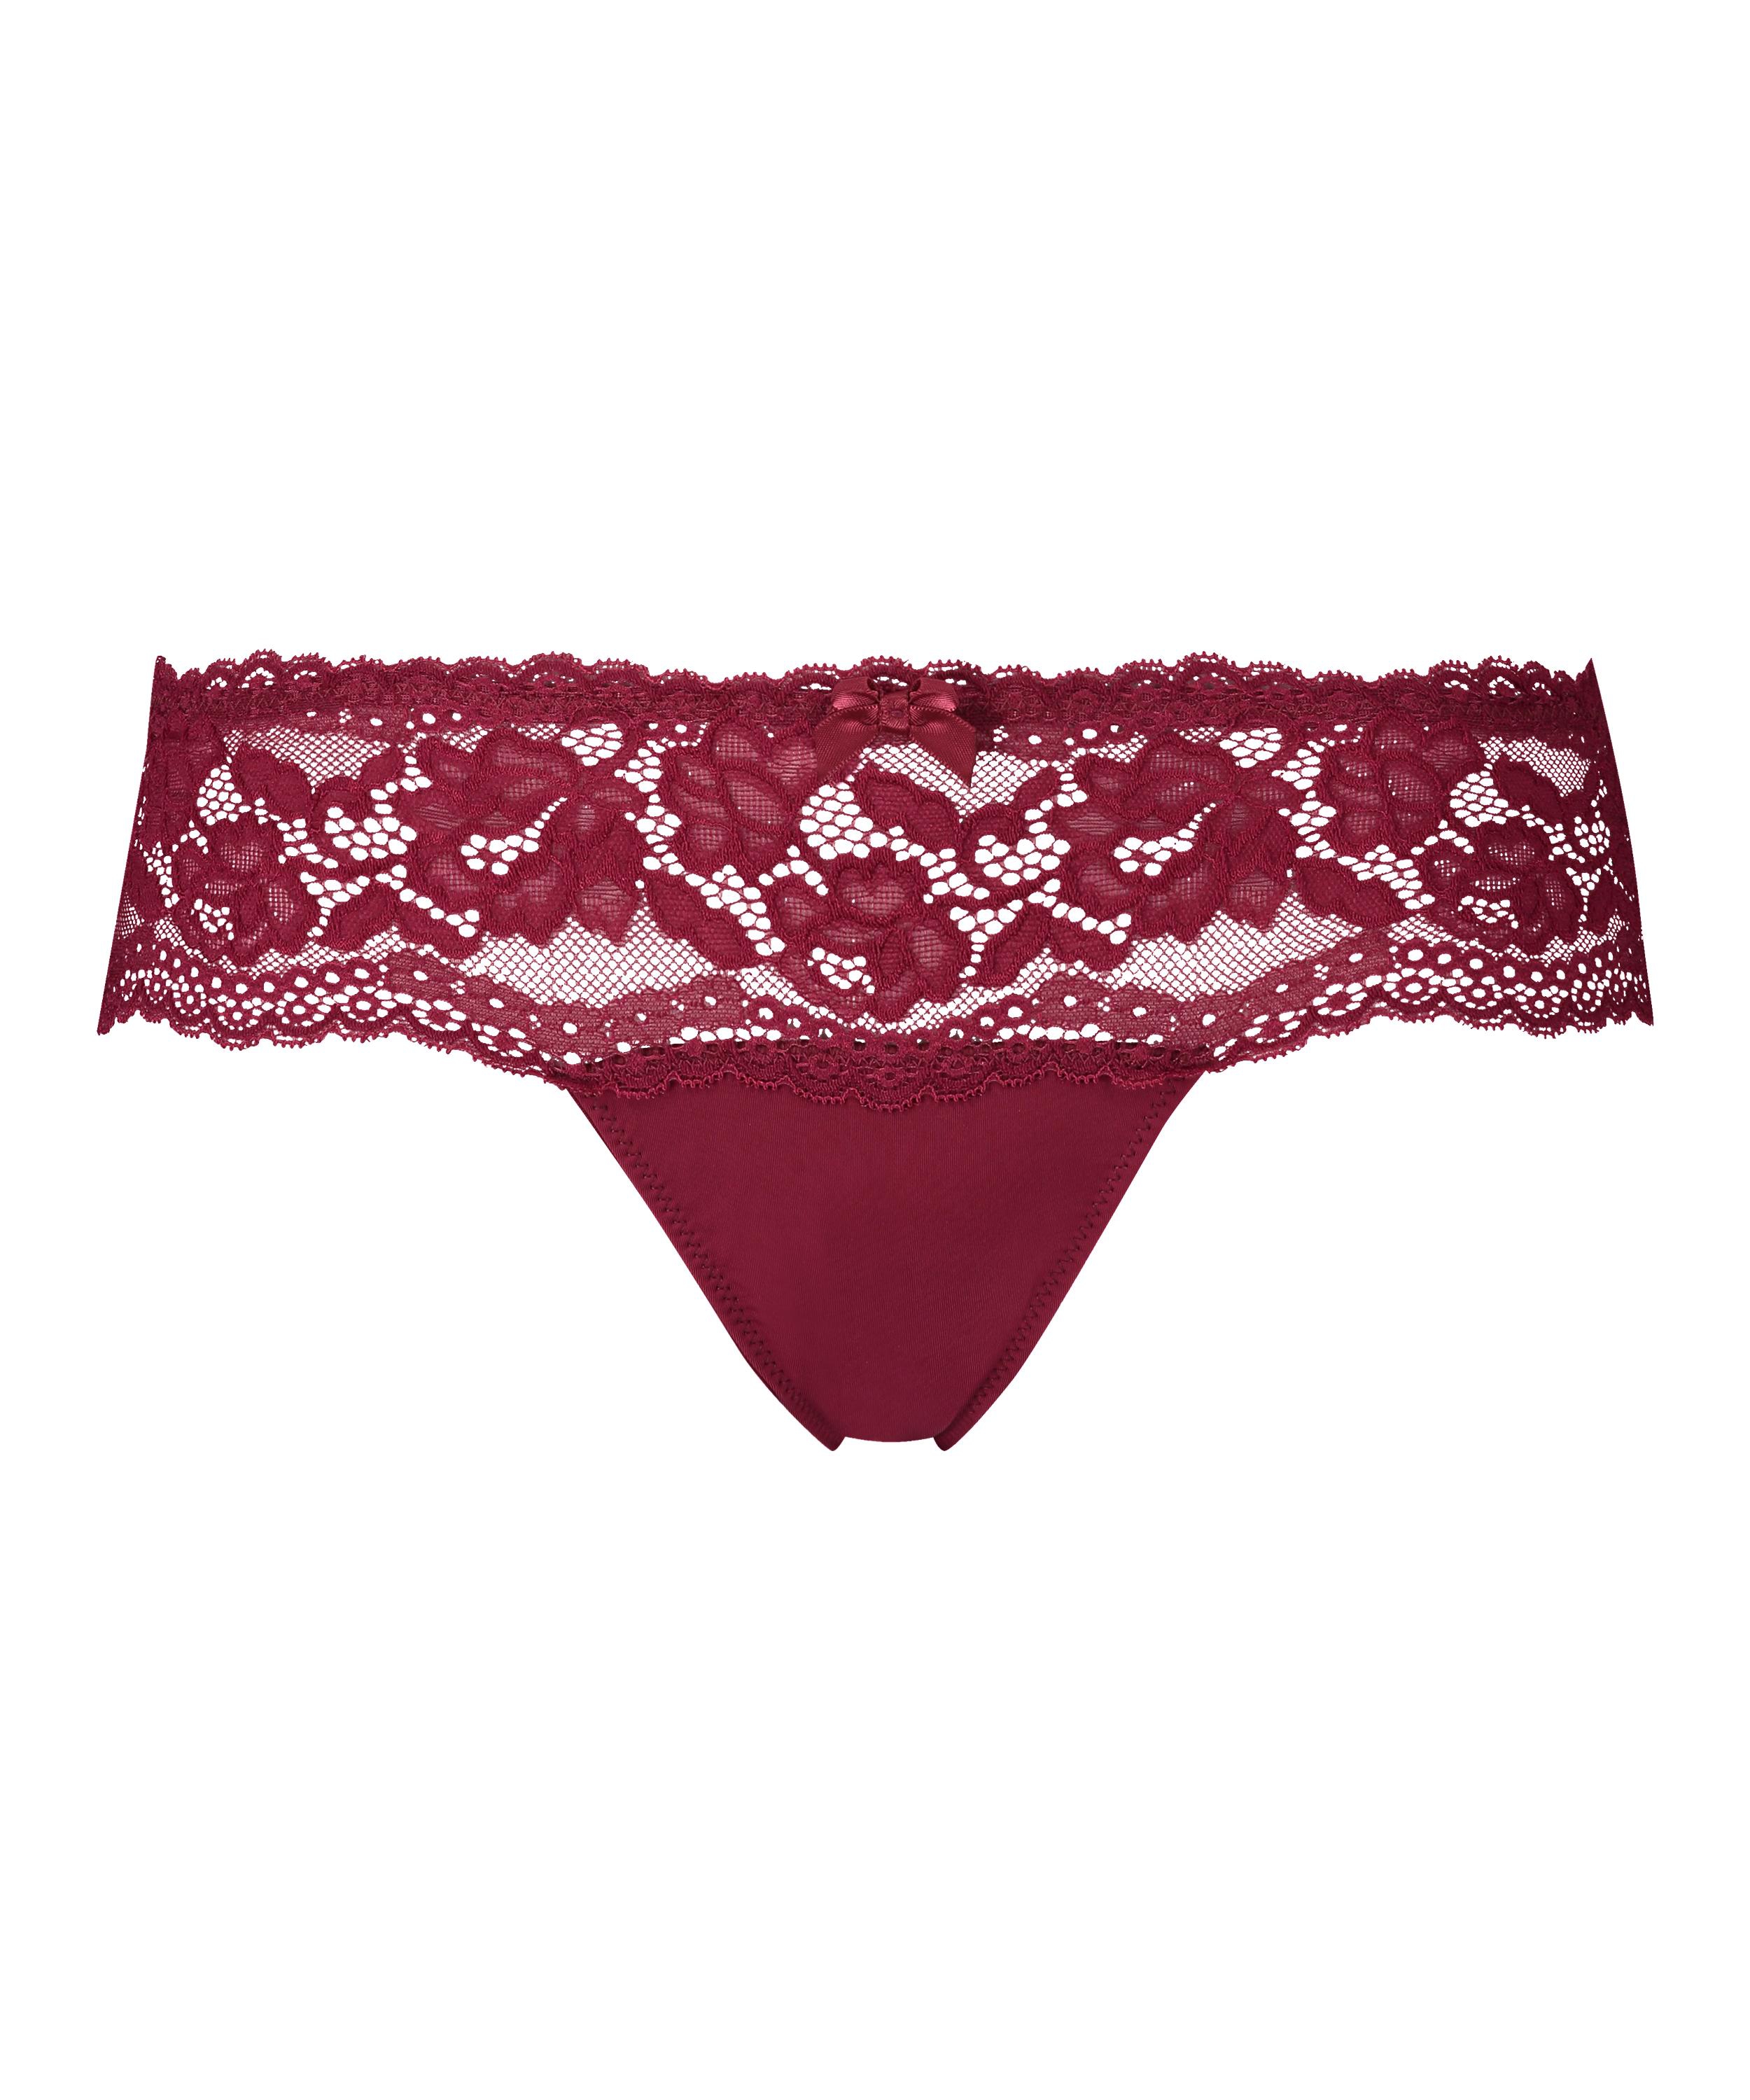 Boxerstring Florence, Rood, main